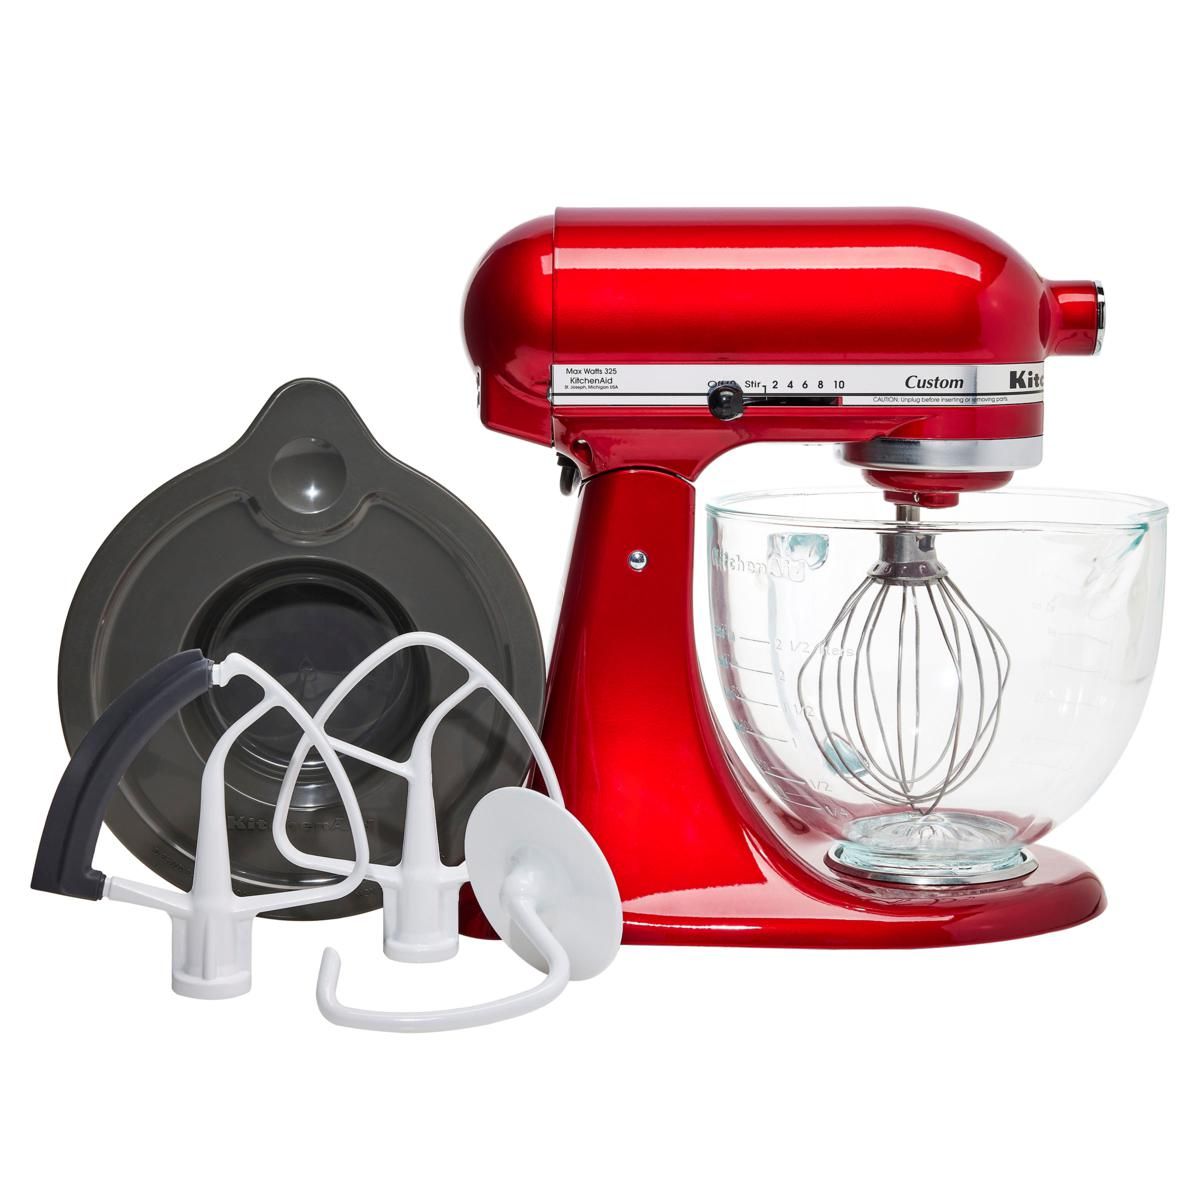 KitchenAid 5-Quart Stand Mixer with Glass Bowl and Flex Edge Beater | HSN